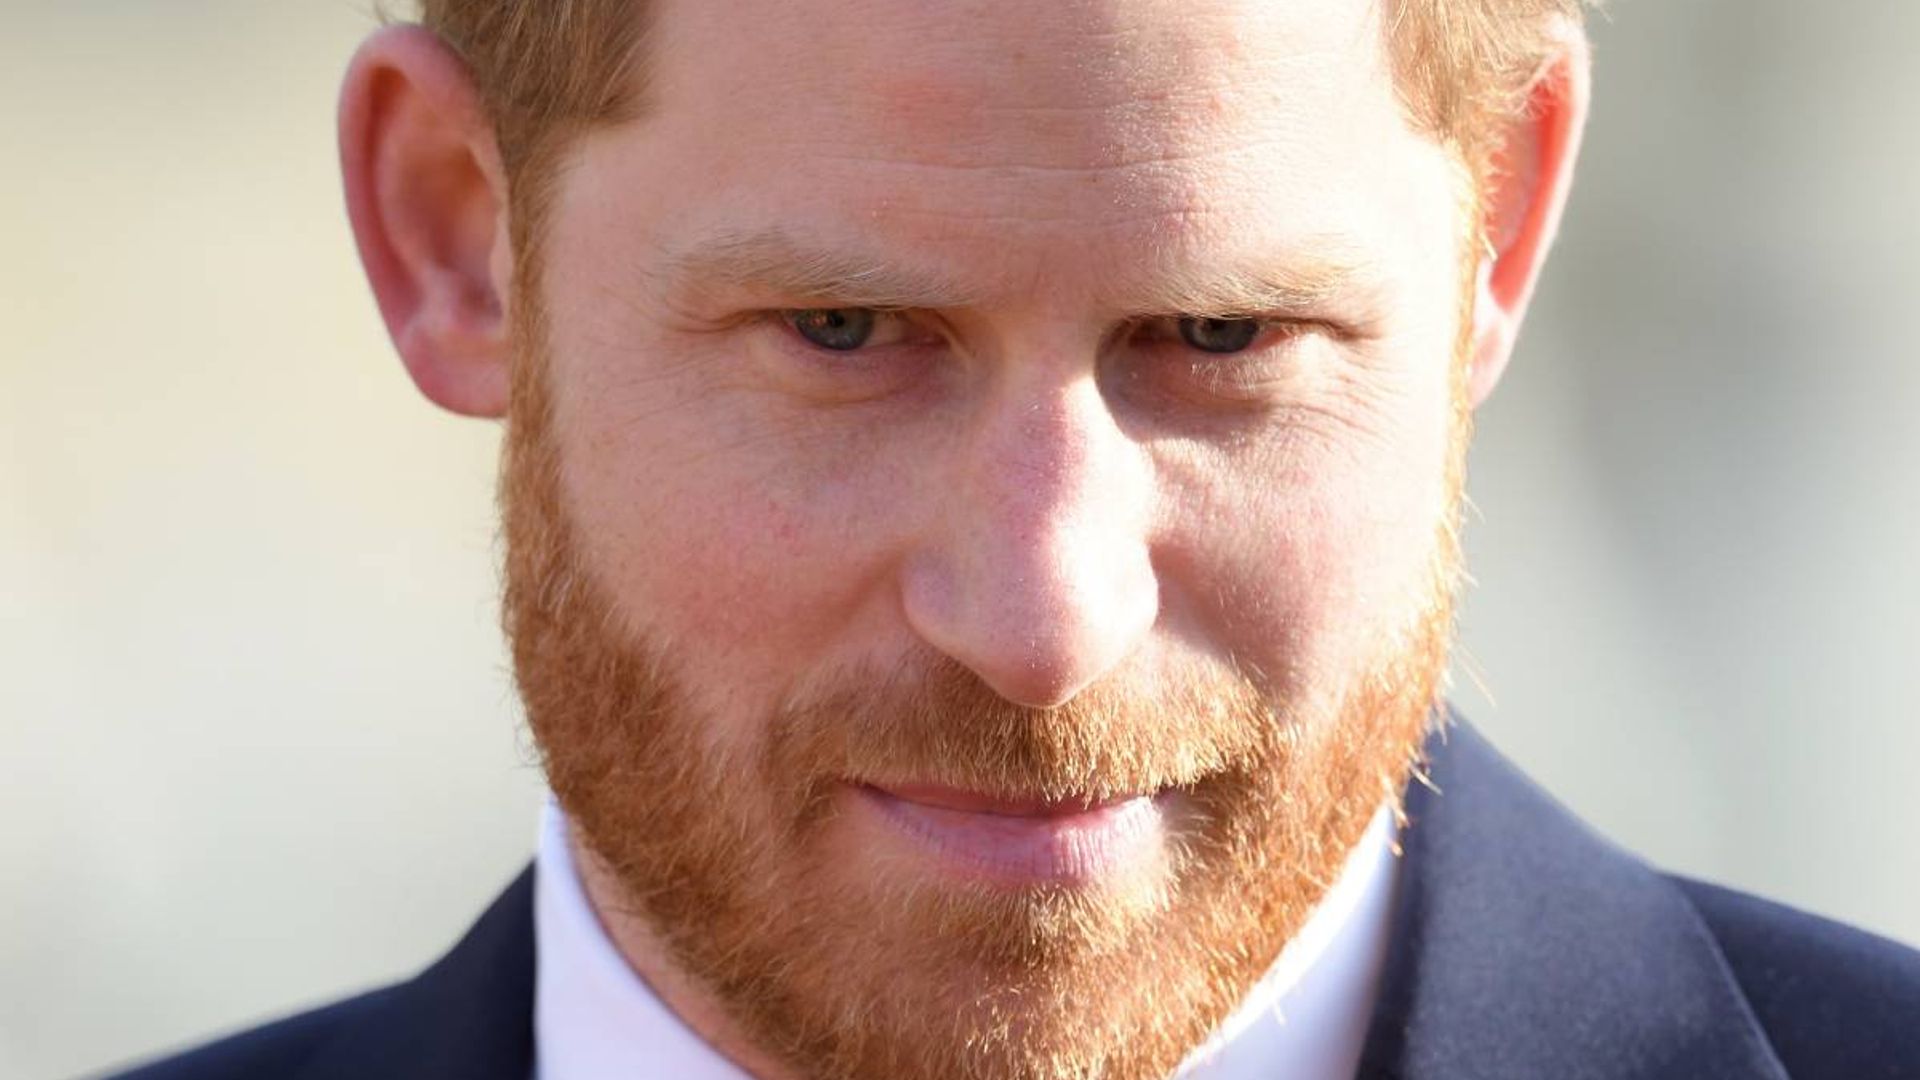 prince harry support stepping down meghan markle